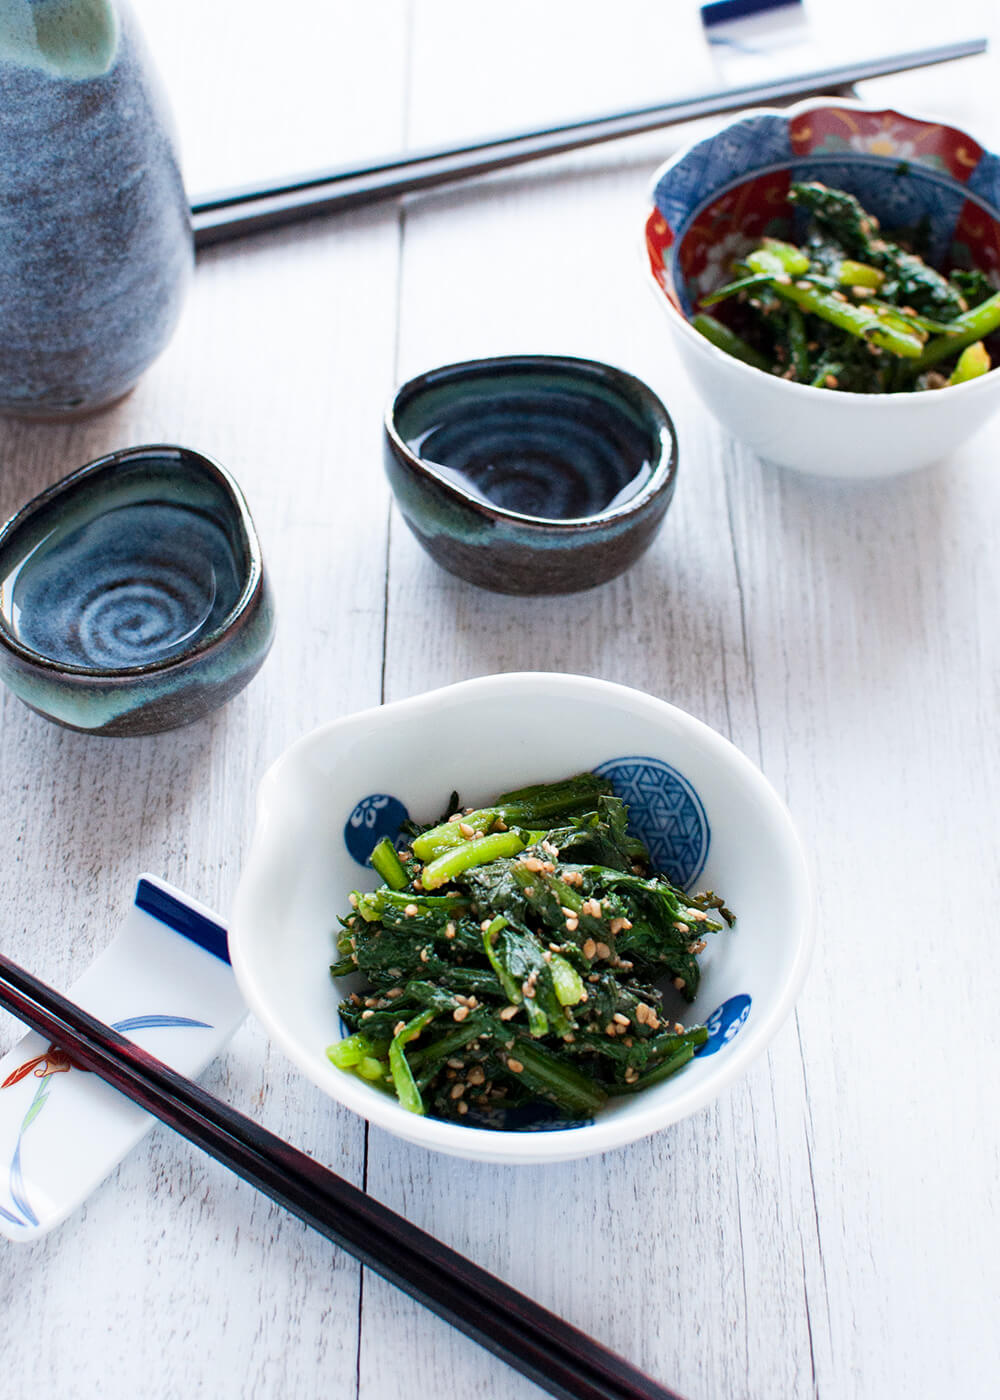 Goma-ae (胡麻和え) is a side dish made with vegetables and sweet sesame dressing. This is a pure vegetarian dish and very quick to make. The dressing has the full flavour of sesame with a little bit of sweetness and it goes so well with the slight bitterness of chrysanthemum leaves. 